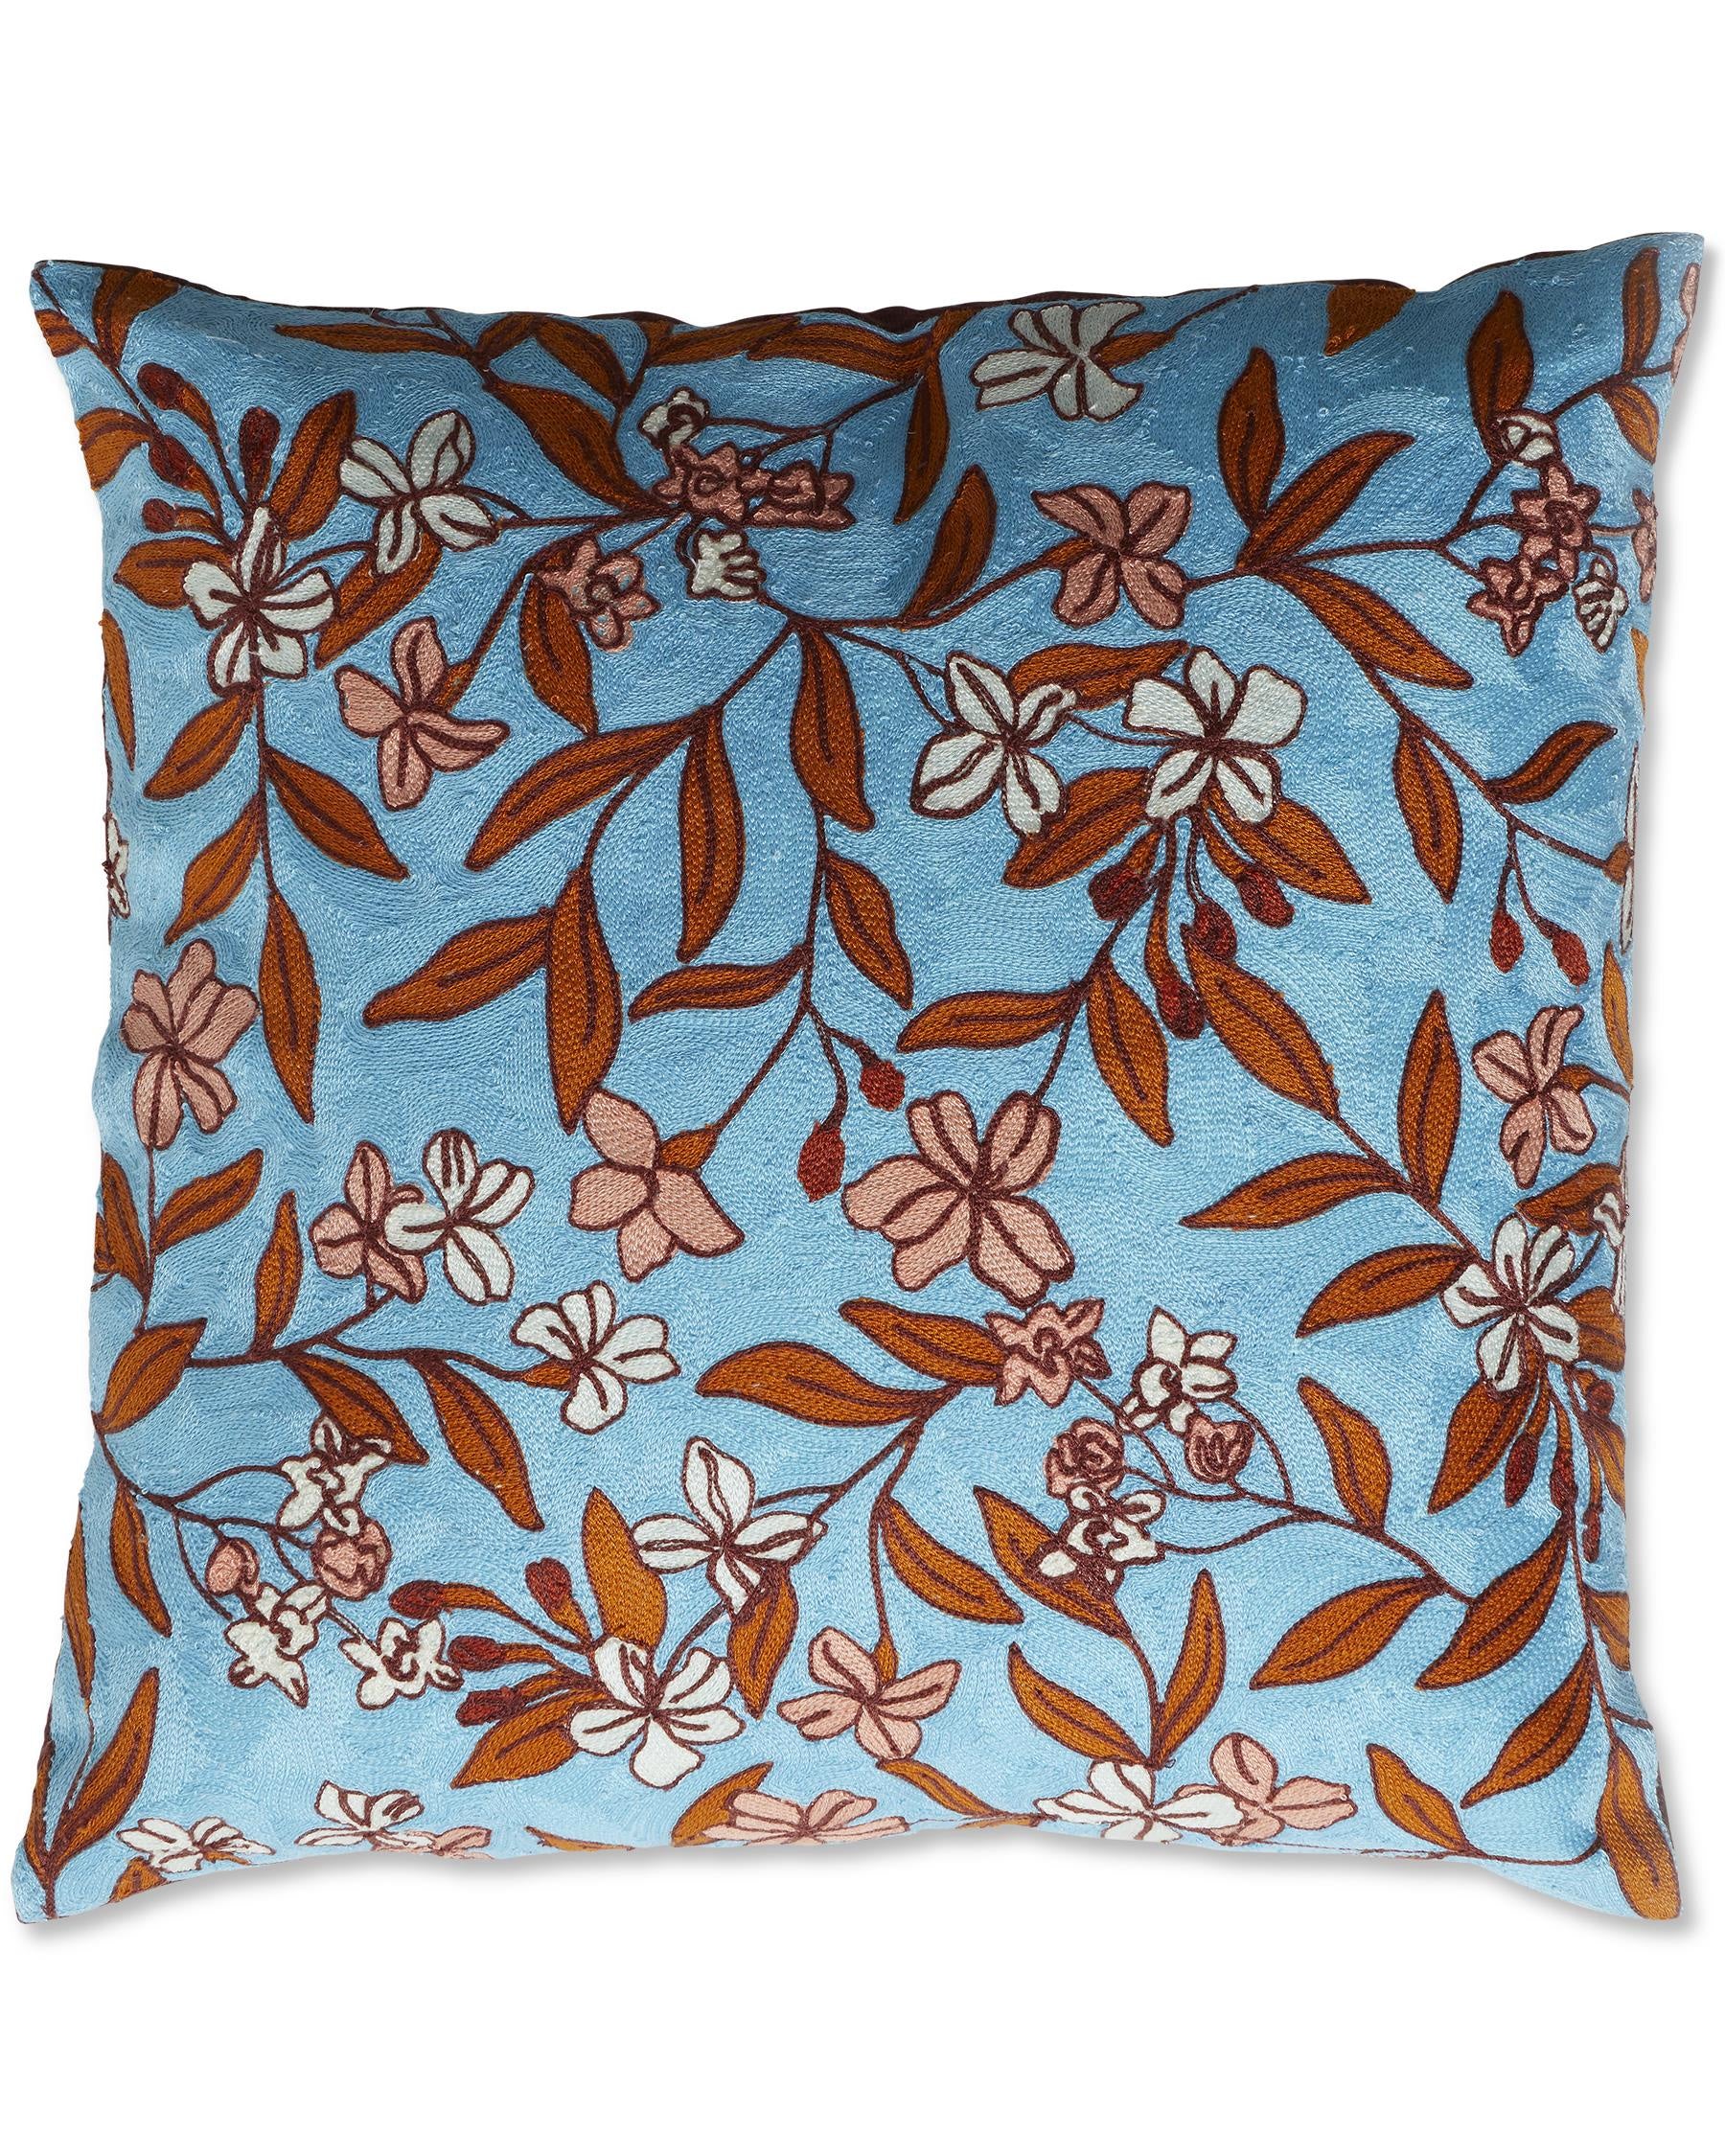 Cushion - Canopy Blue Embroidery